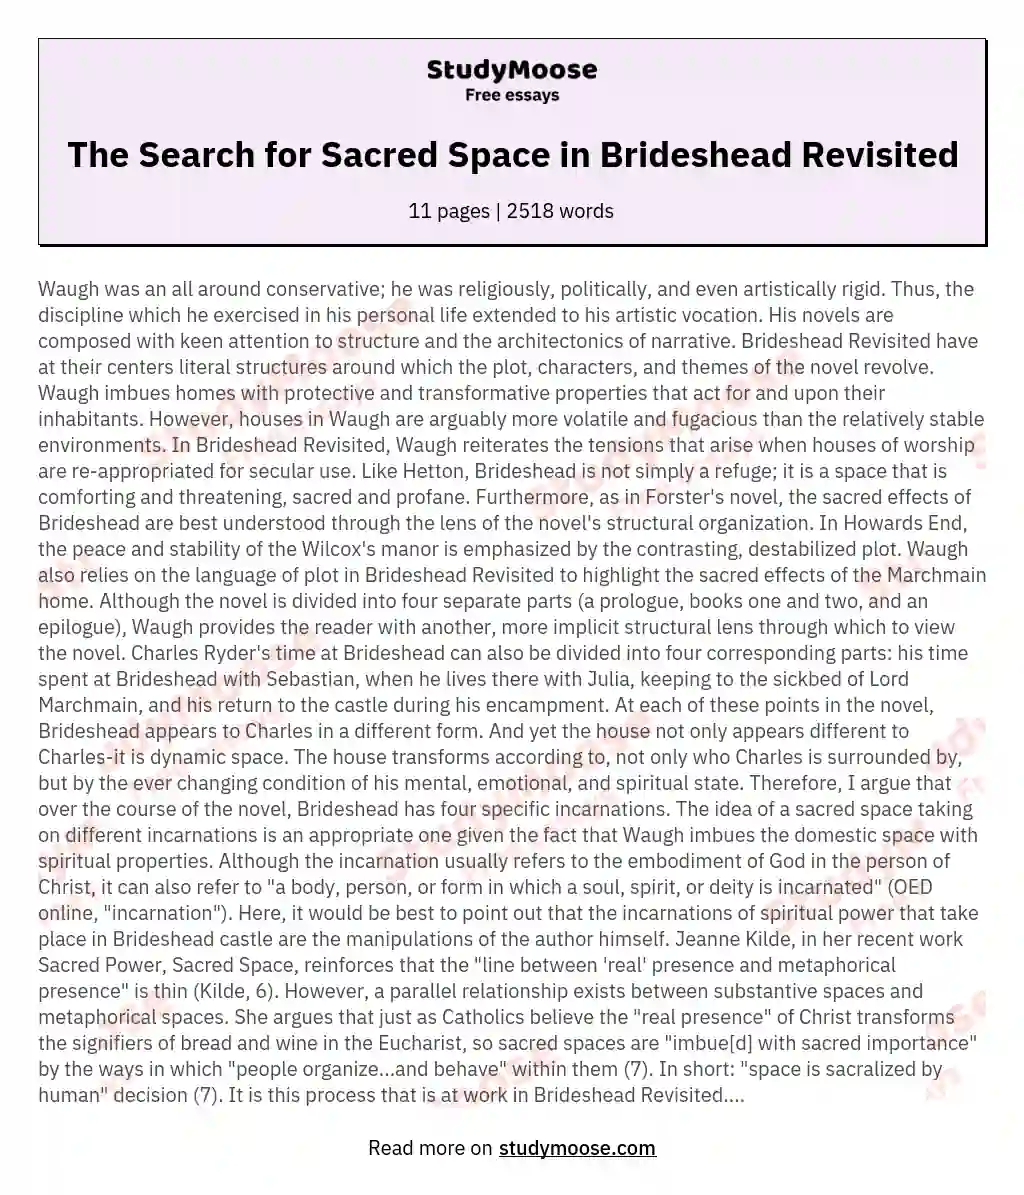 The Search for Sacred Space in Brideshead Revisited